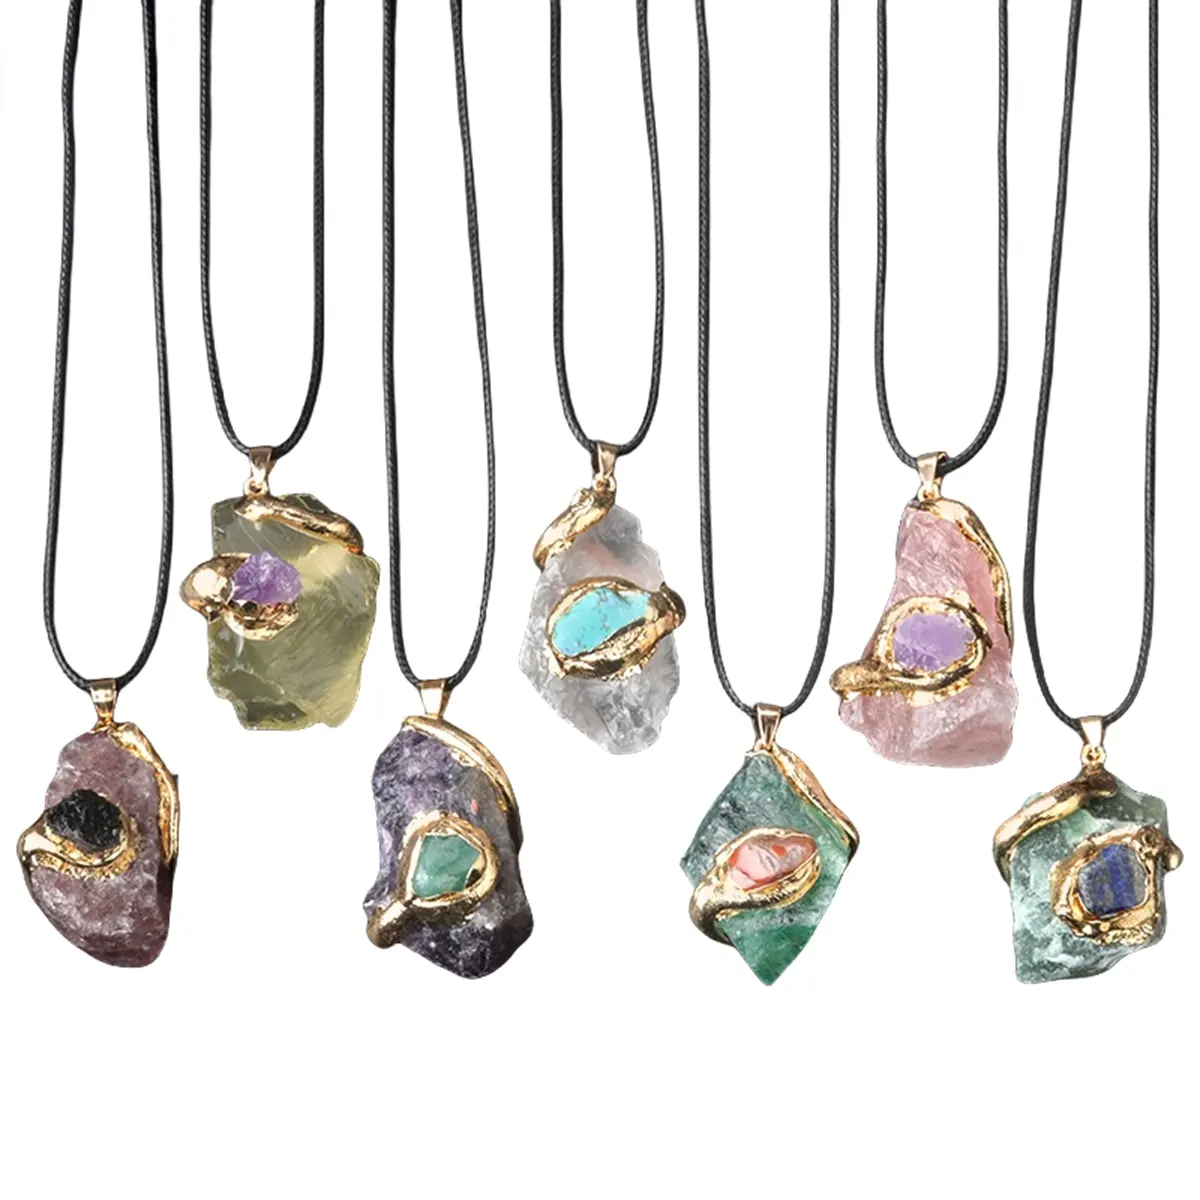 Super Large Gilded Crystal Original Stone Pendant with Multi-color Crystal Irregular Necklace Accessories